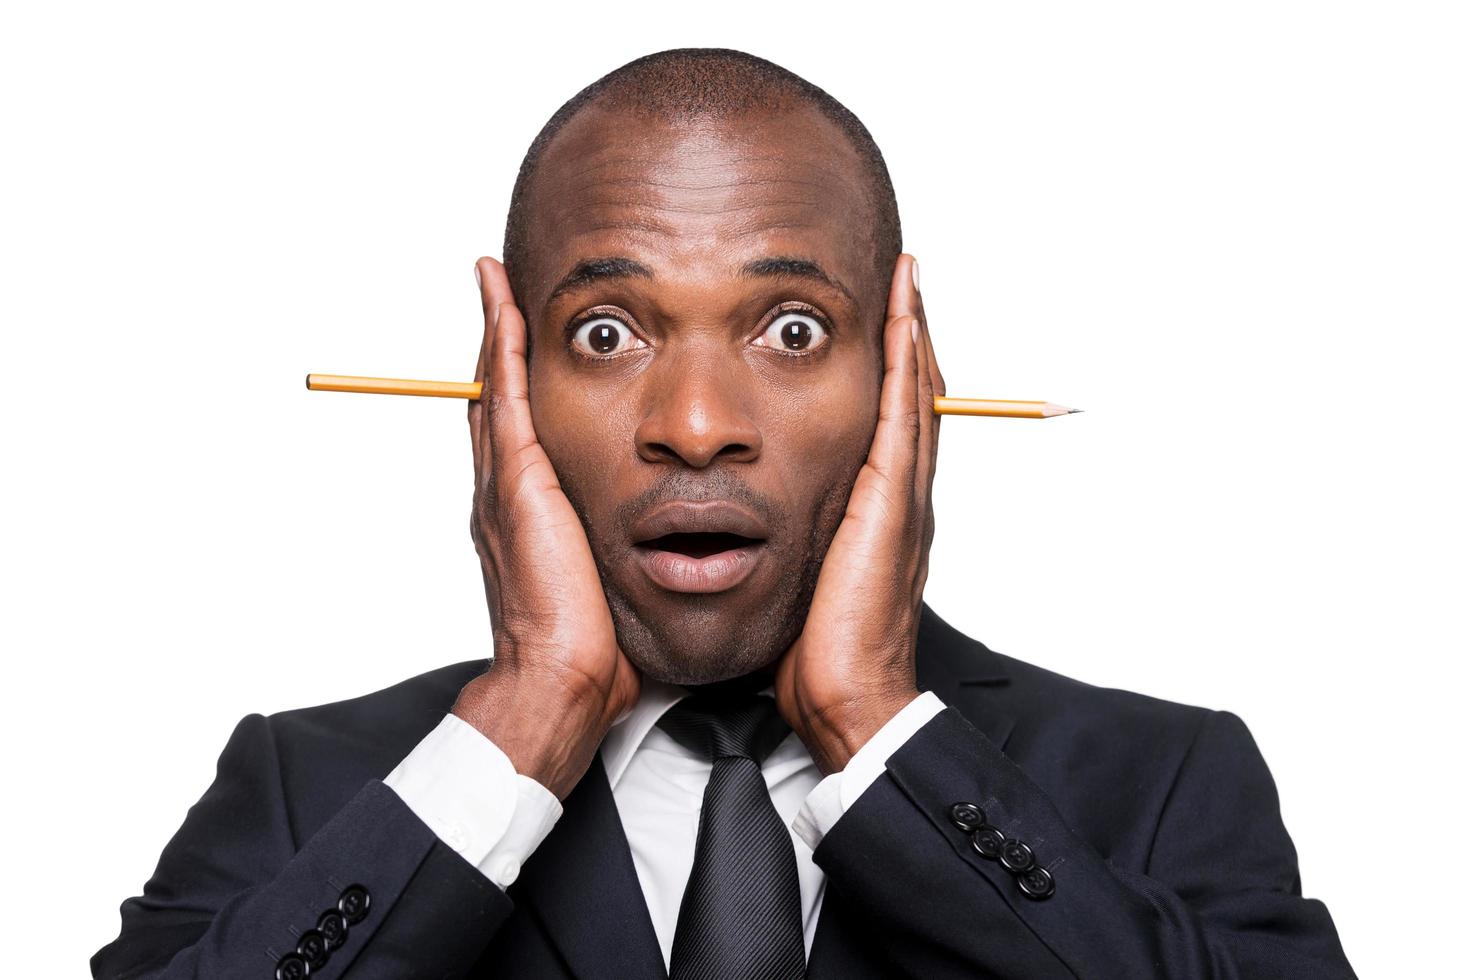 Something wrong... Surprised young African man in formalwear holding head in hands with pencil sticking out of it while standing isolated on white background photo